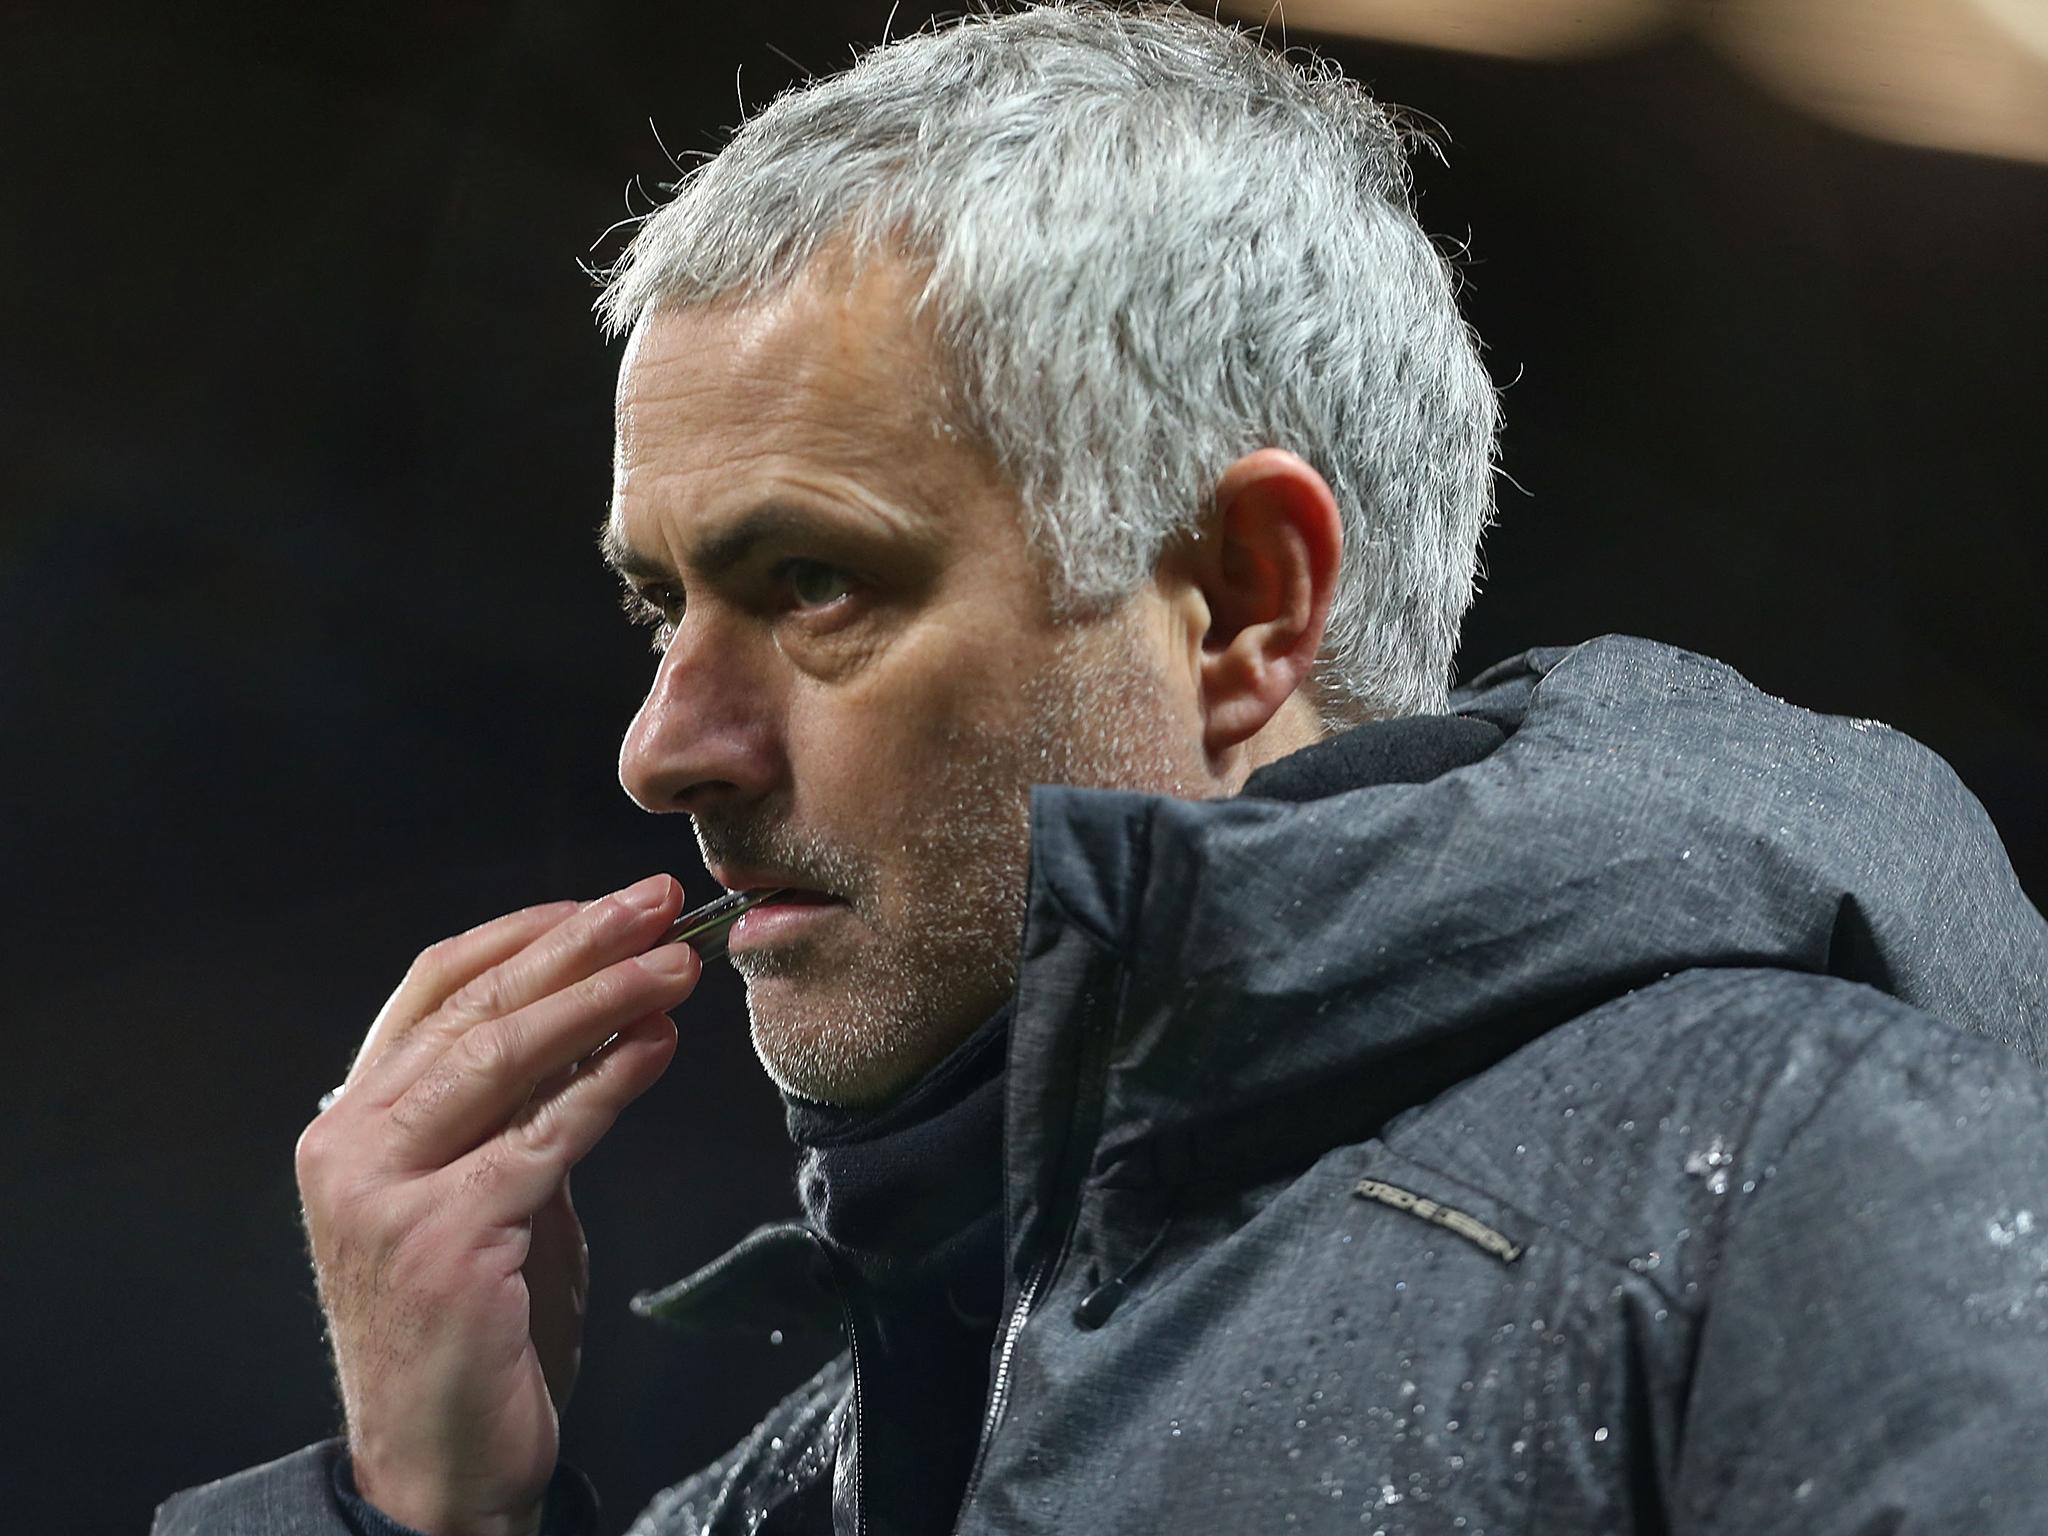 Jose Mourinho has been asked by the FA to explain comments that he made ahead of the Manchester derby